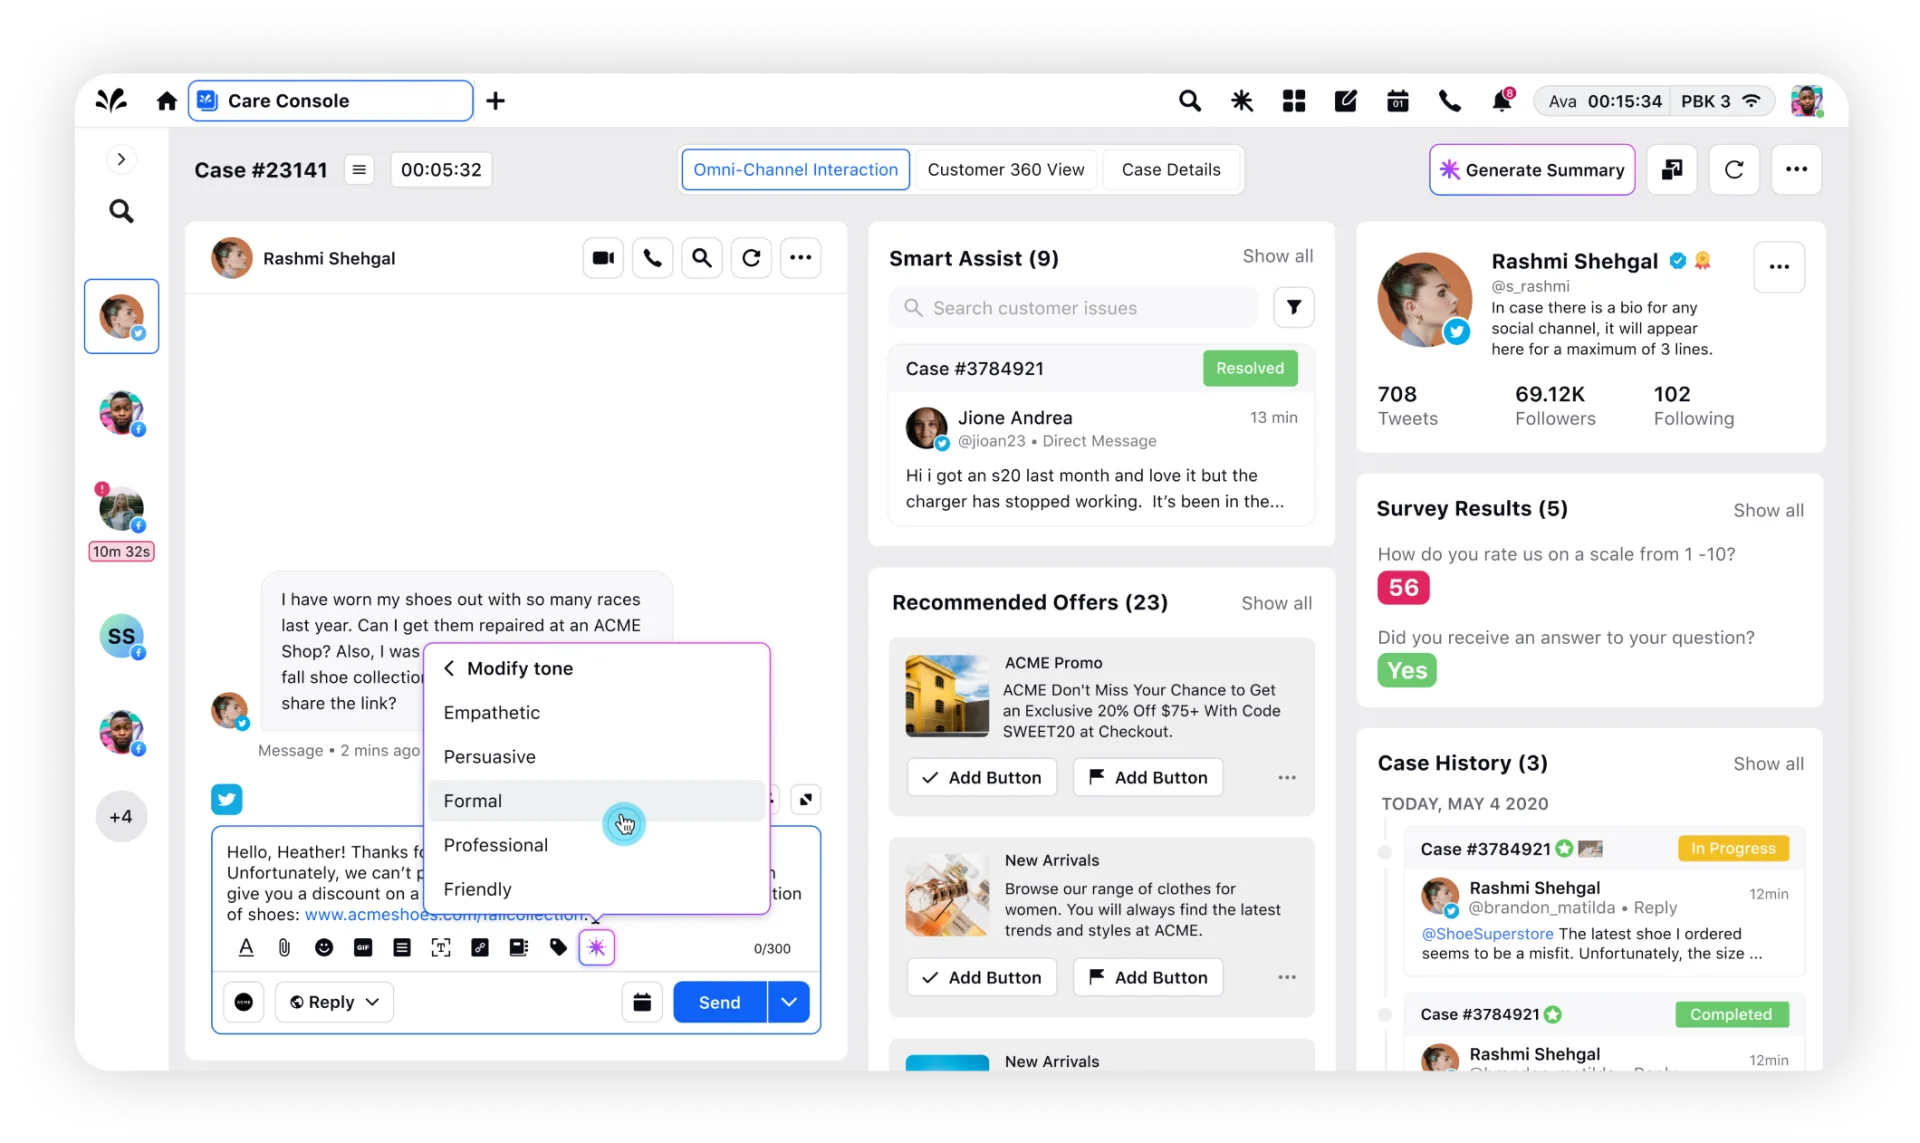 Sprinklr AI+ aids with tone moderation in customer service messaging